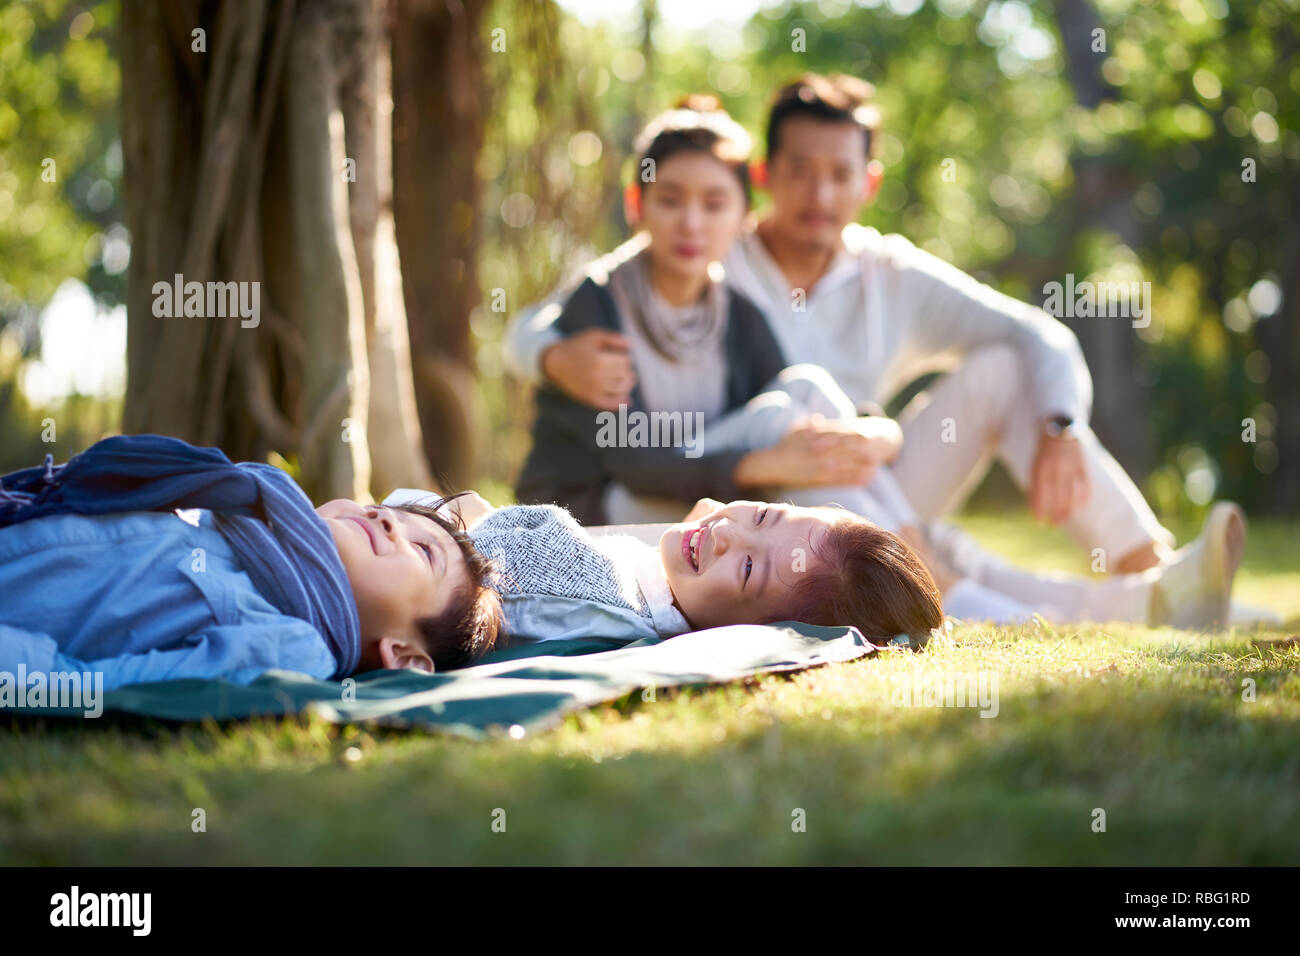 two asian children little boy and girl having fun lying on grass with parents sitting watching in background. Stock Photo